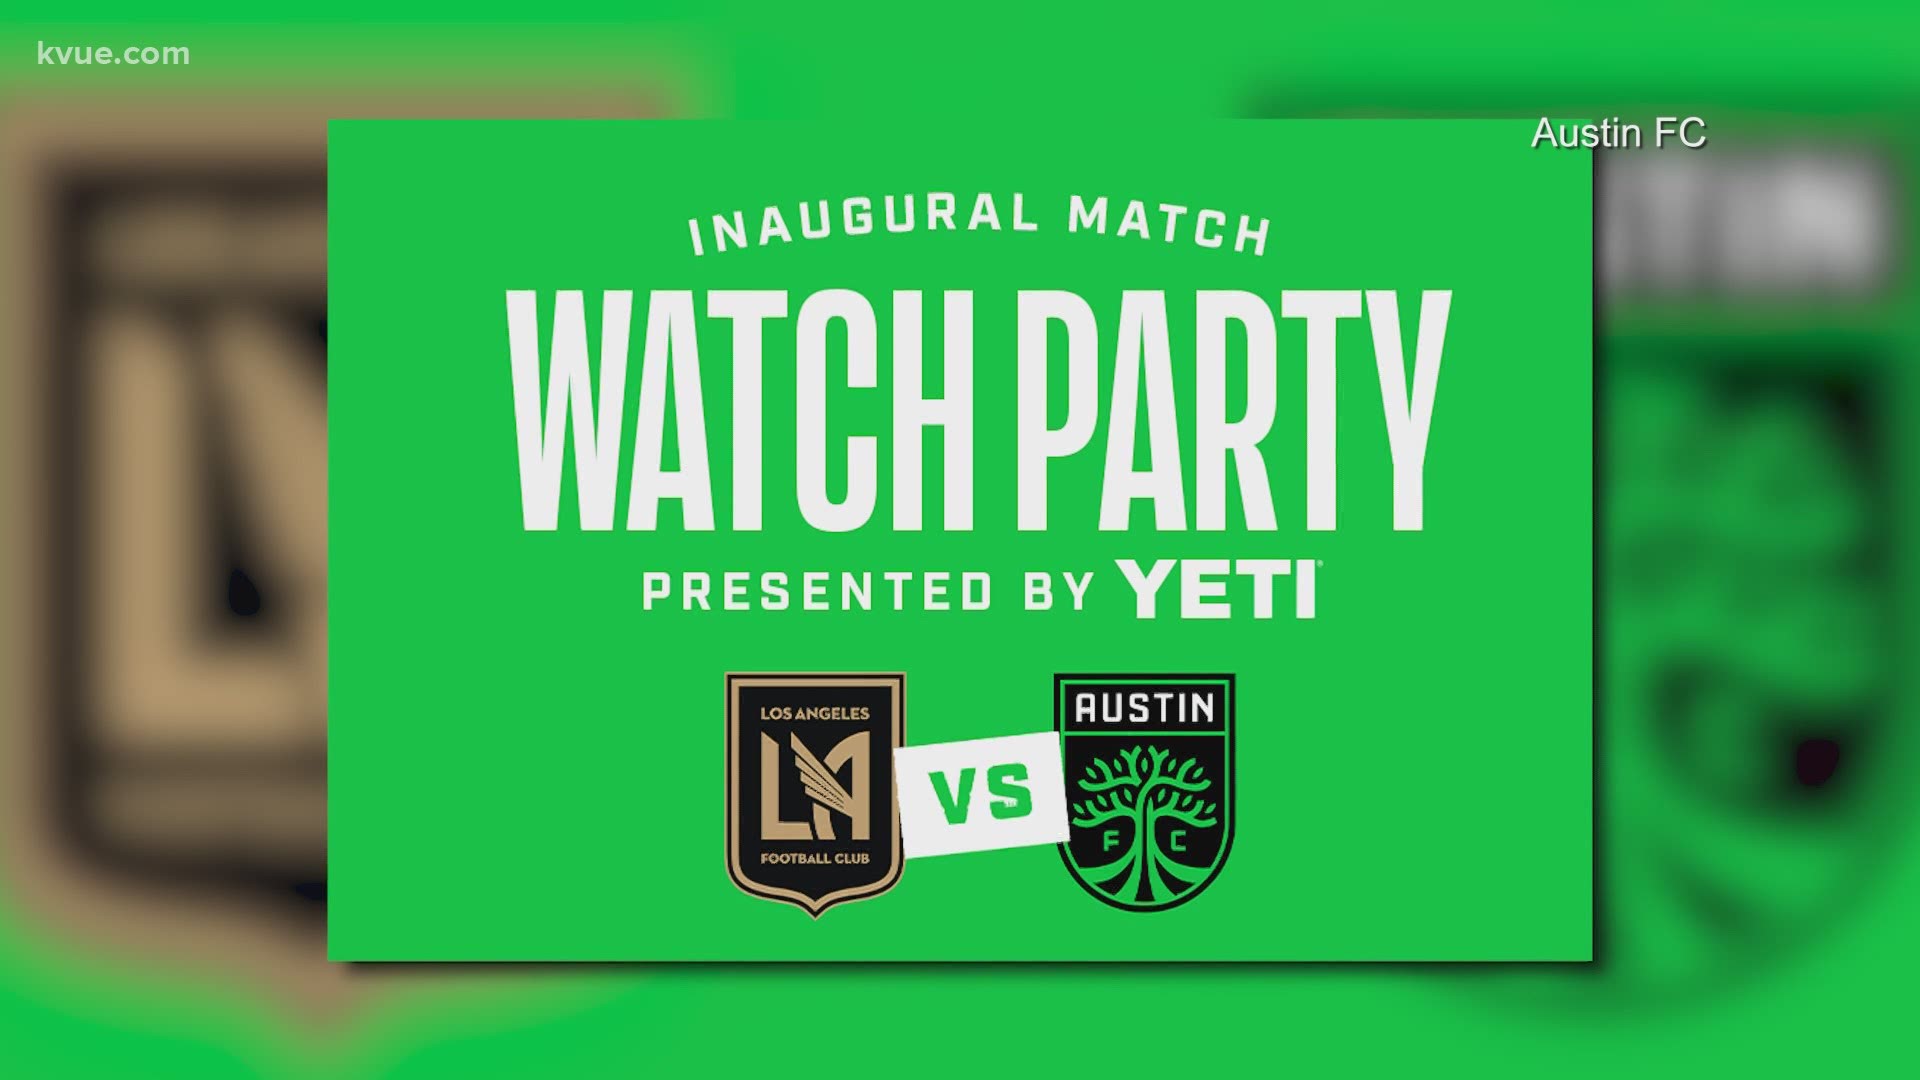 Austin FC's season opener against LAFC will be played on April 17 in Los Angeles. There will be a free watch party at the Long Center, but fans must register first.